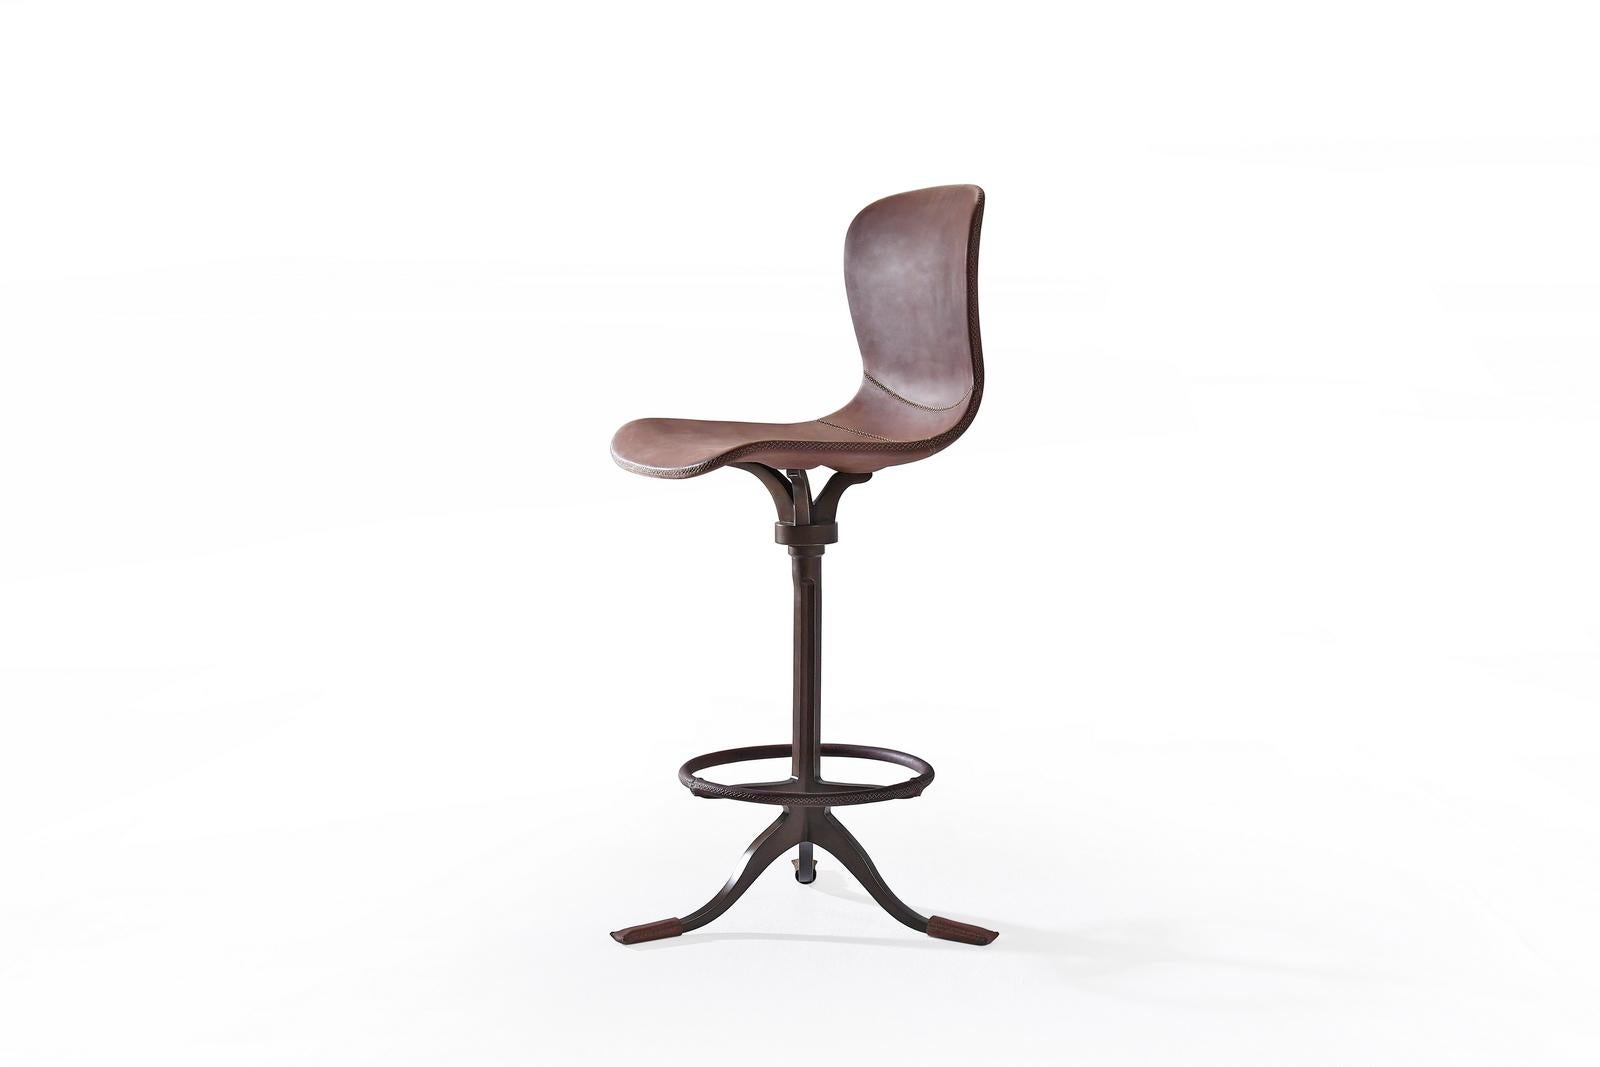 Model: PT473 counter height chair + Swivel + footrest ring.
Seat: Leather.
Seat color: Truffe (Dark Brown).
Base: PT473 sand cast brass.
Base finish: Brushed Brown.
Dimensions: 43 x 52 x 99 (seat height 65 cm).
(W x D x H) 16.9 x 20.5 x 39